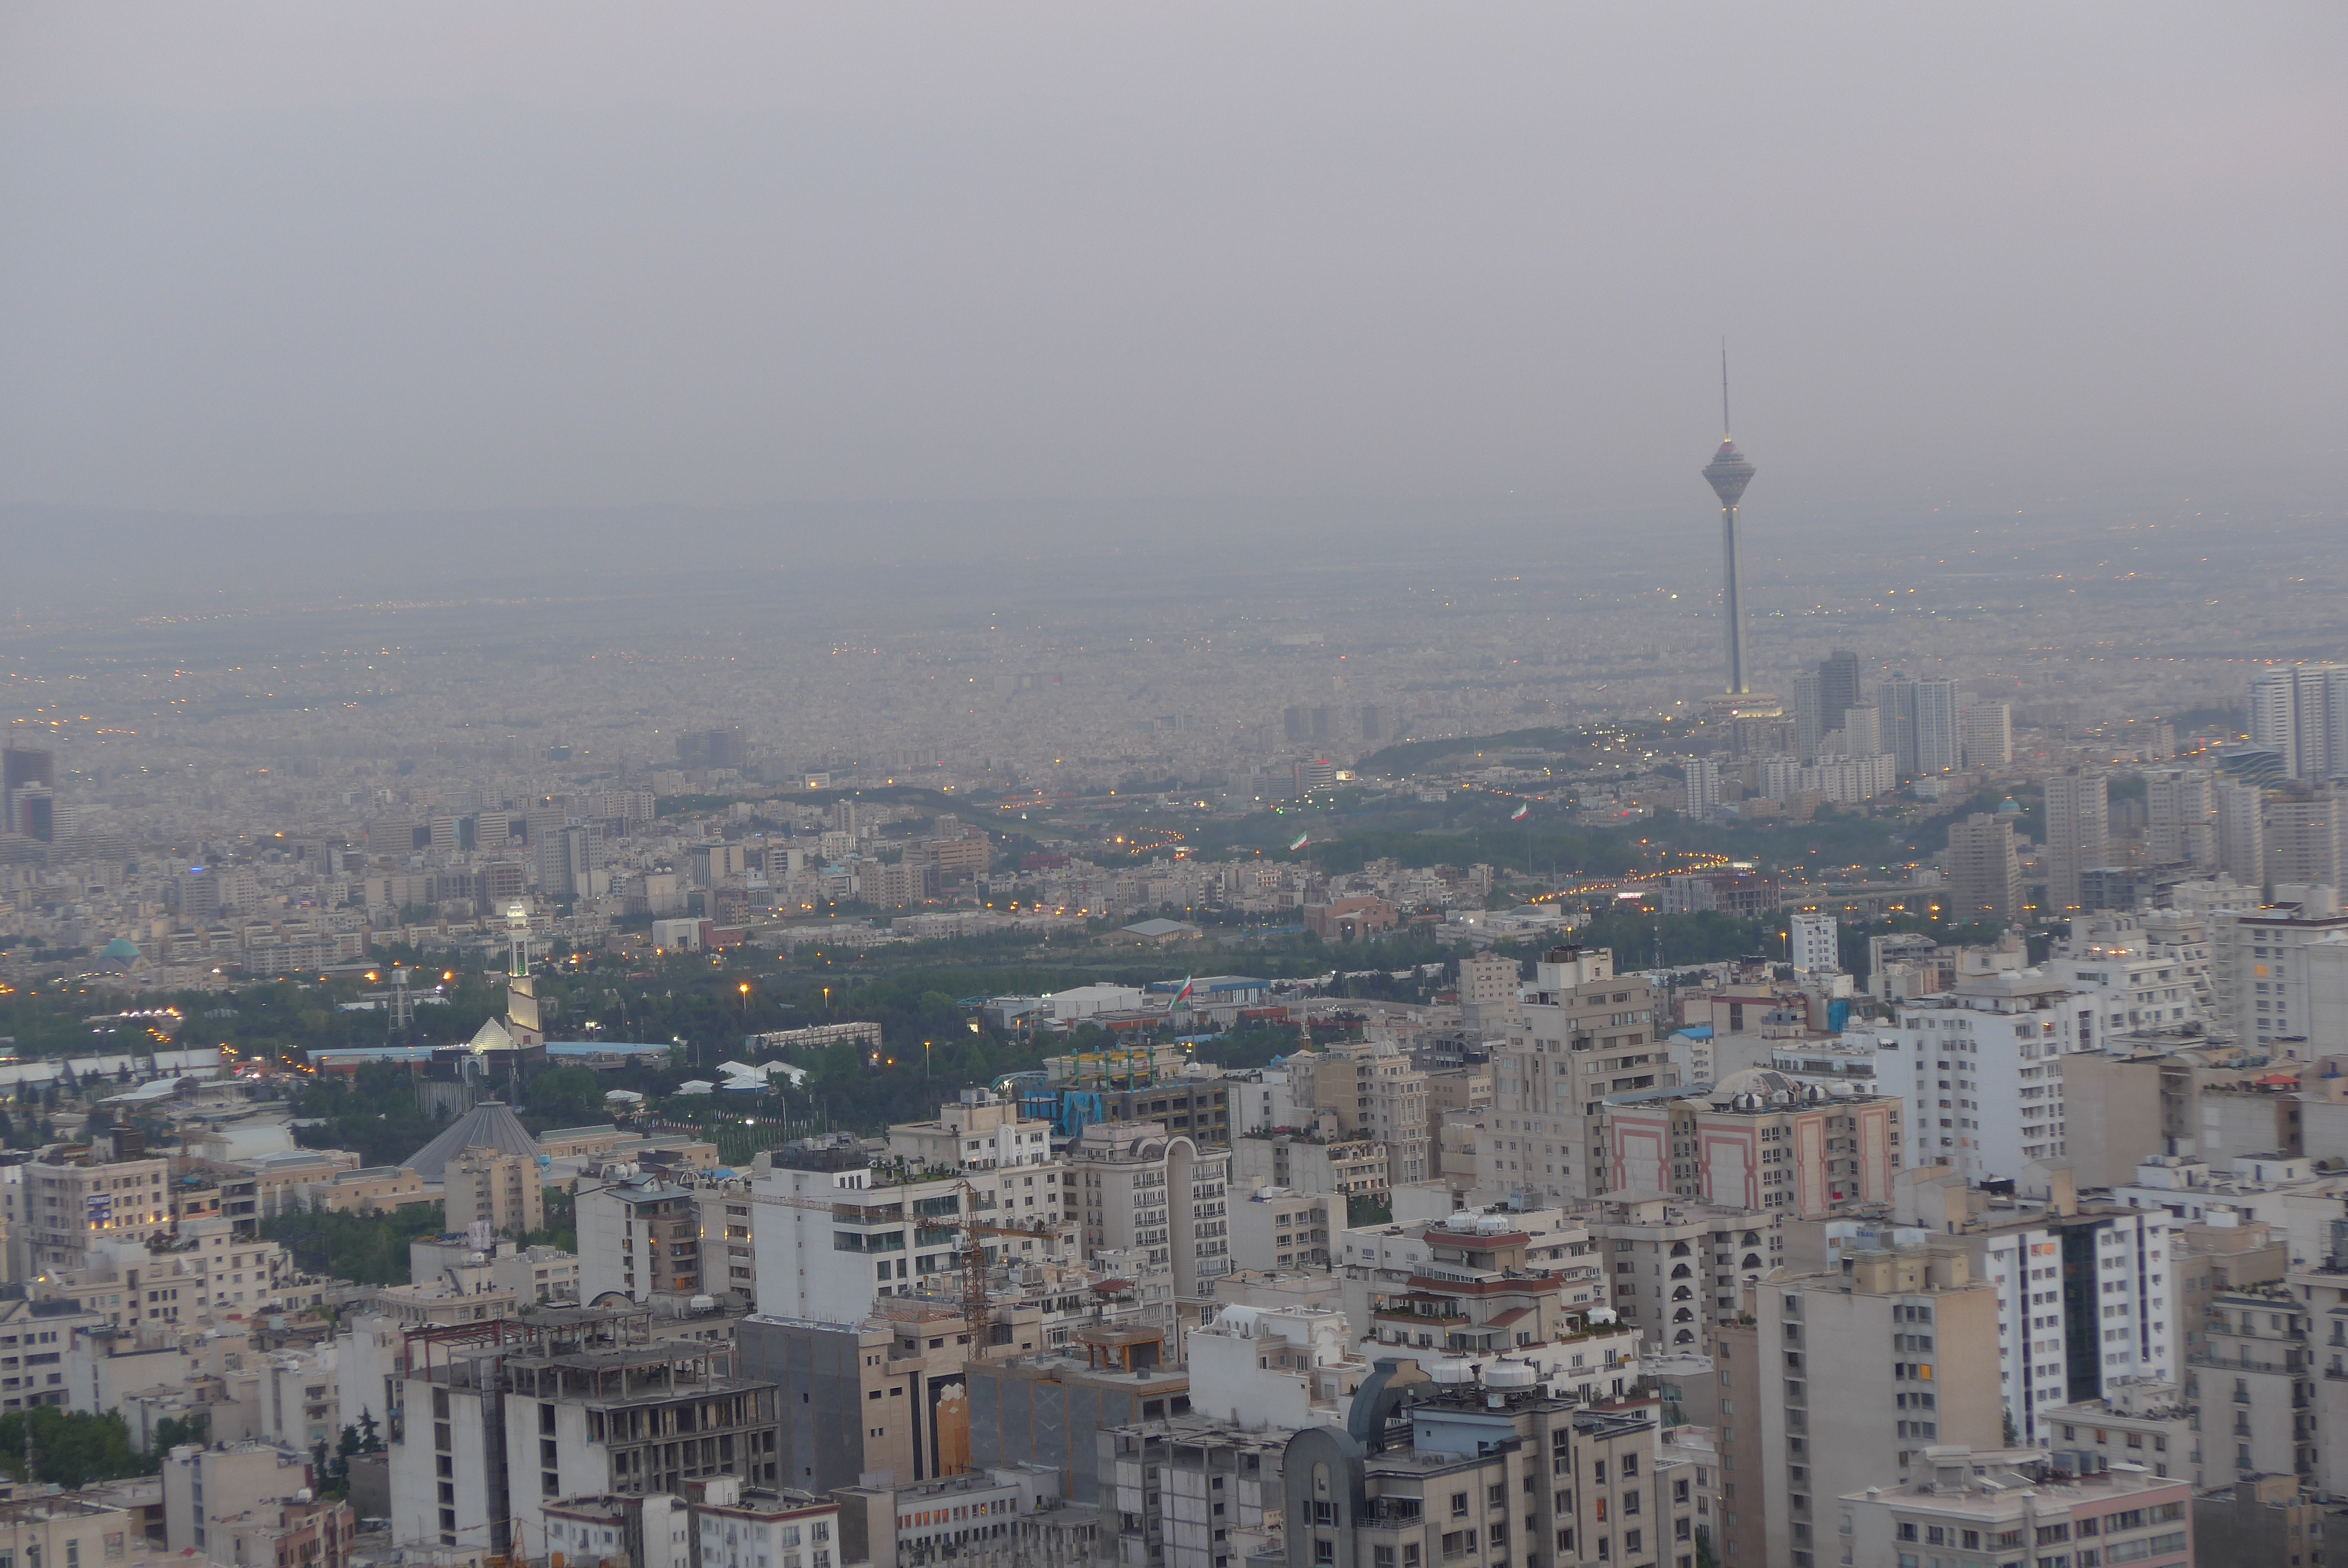 Well, yes, that's also Tehran: Smog!